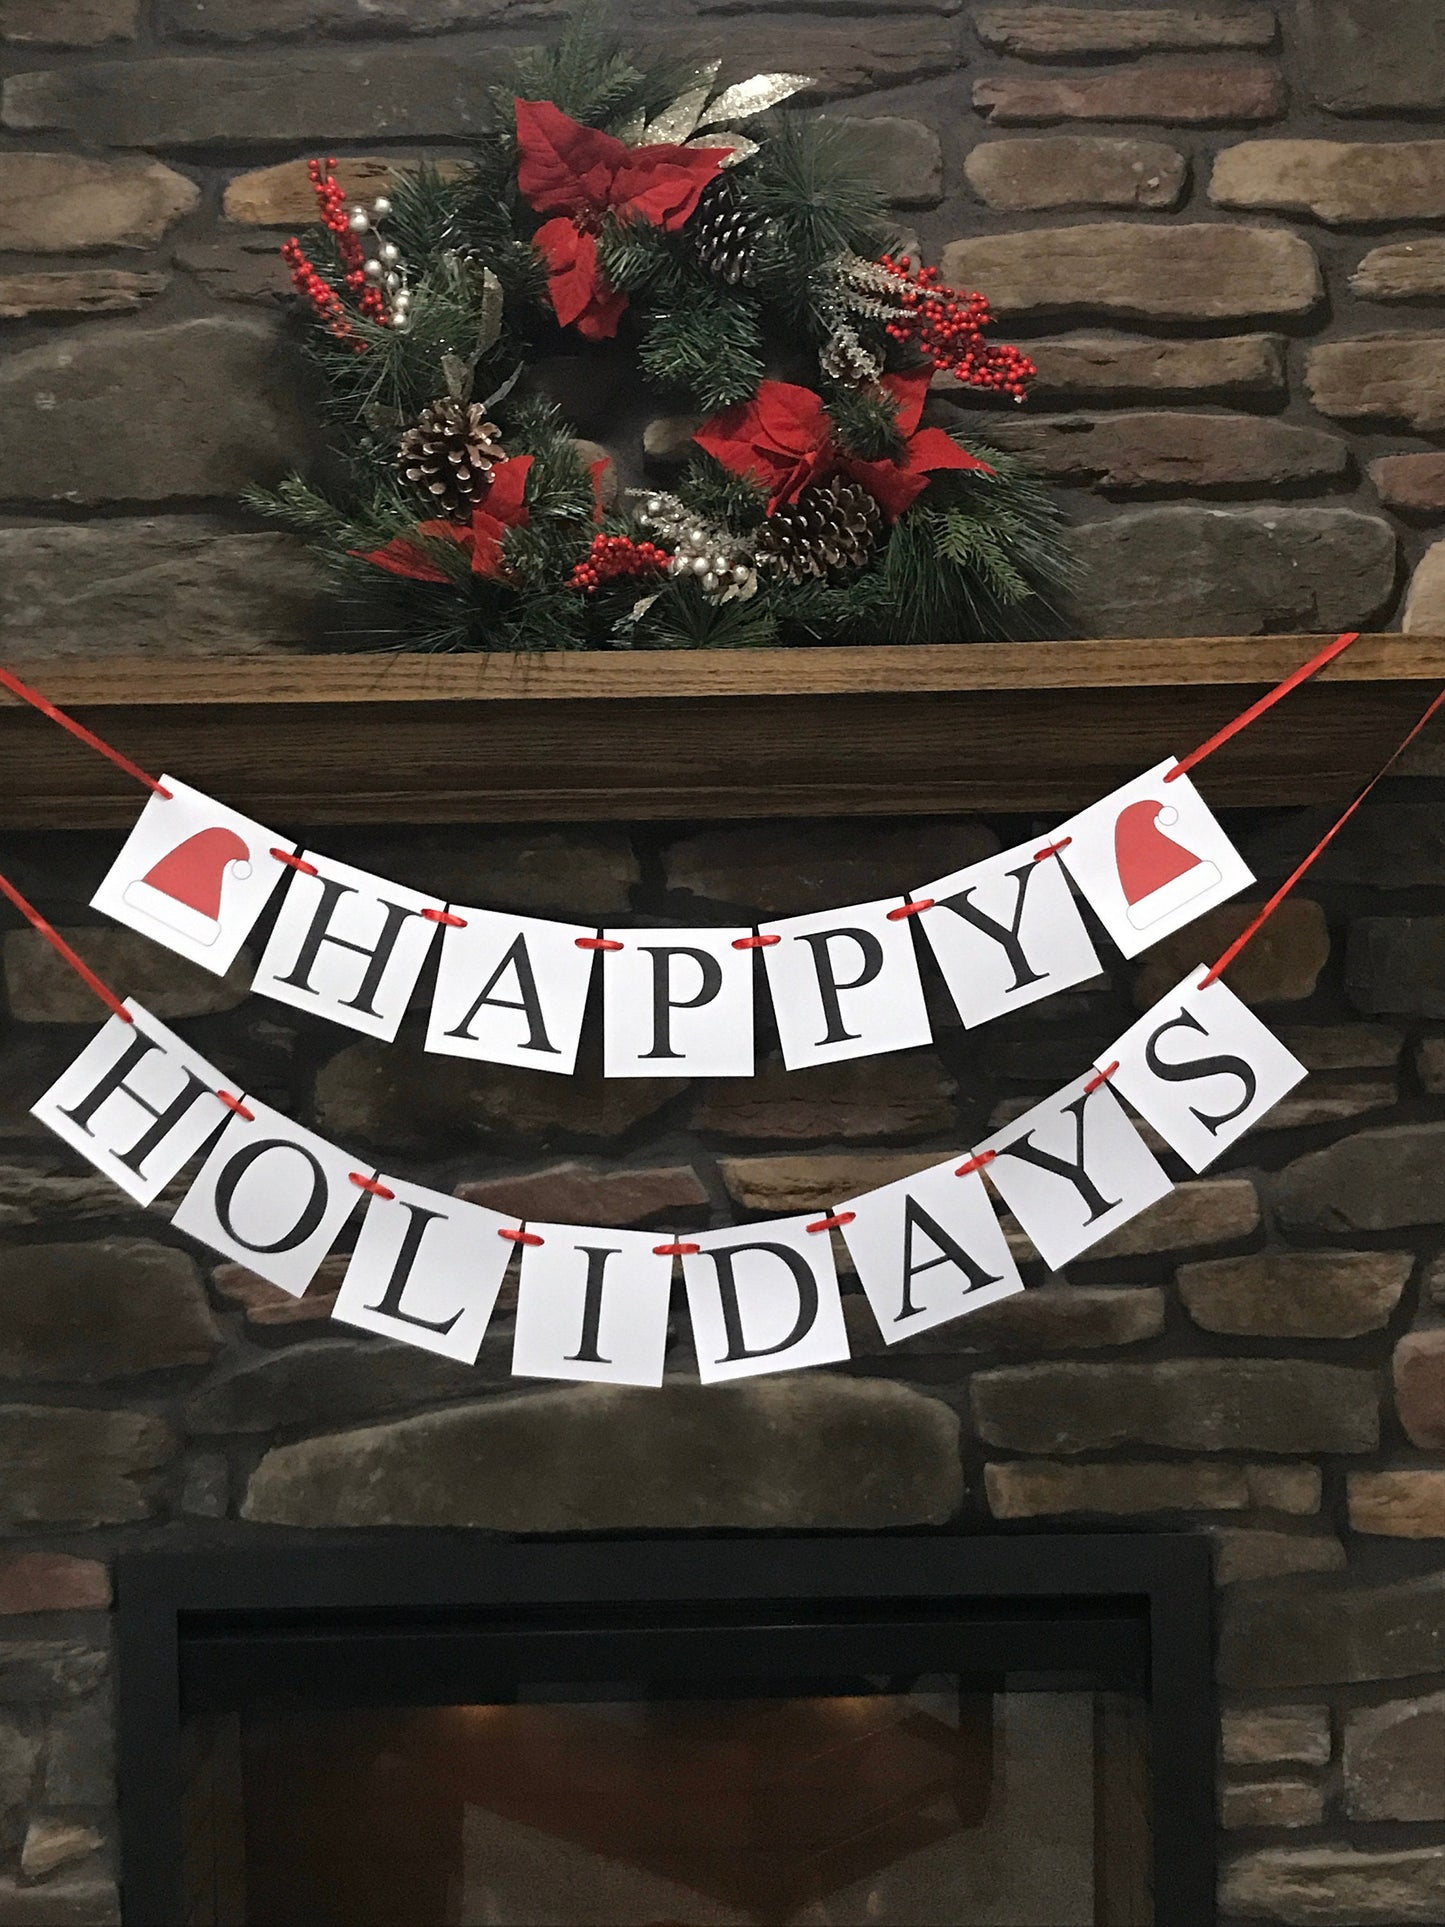 Happy Holidays Banner, Santa hat Christmas decorations, living room holiday decor, fireplace mantel bunting, red Merry Christmas garland